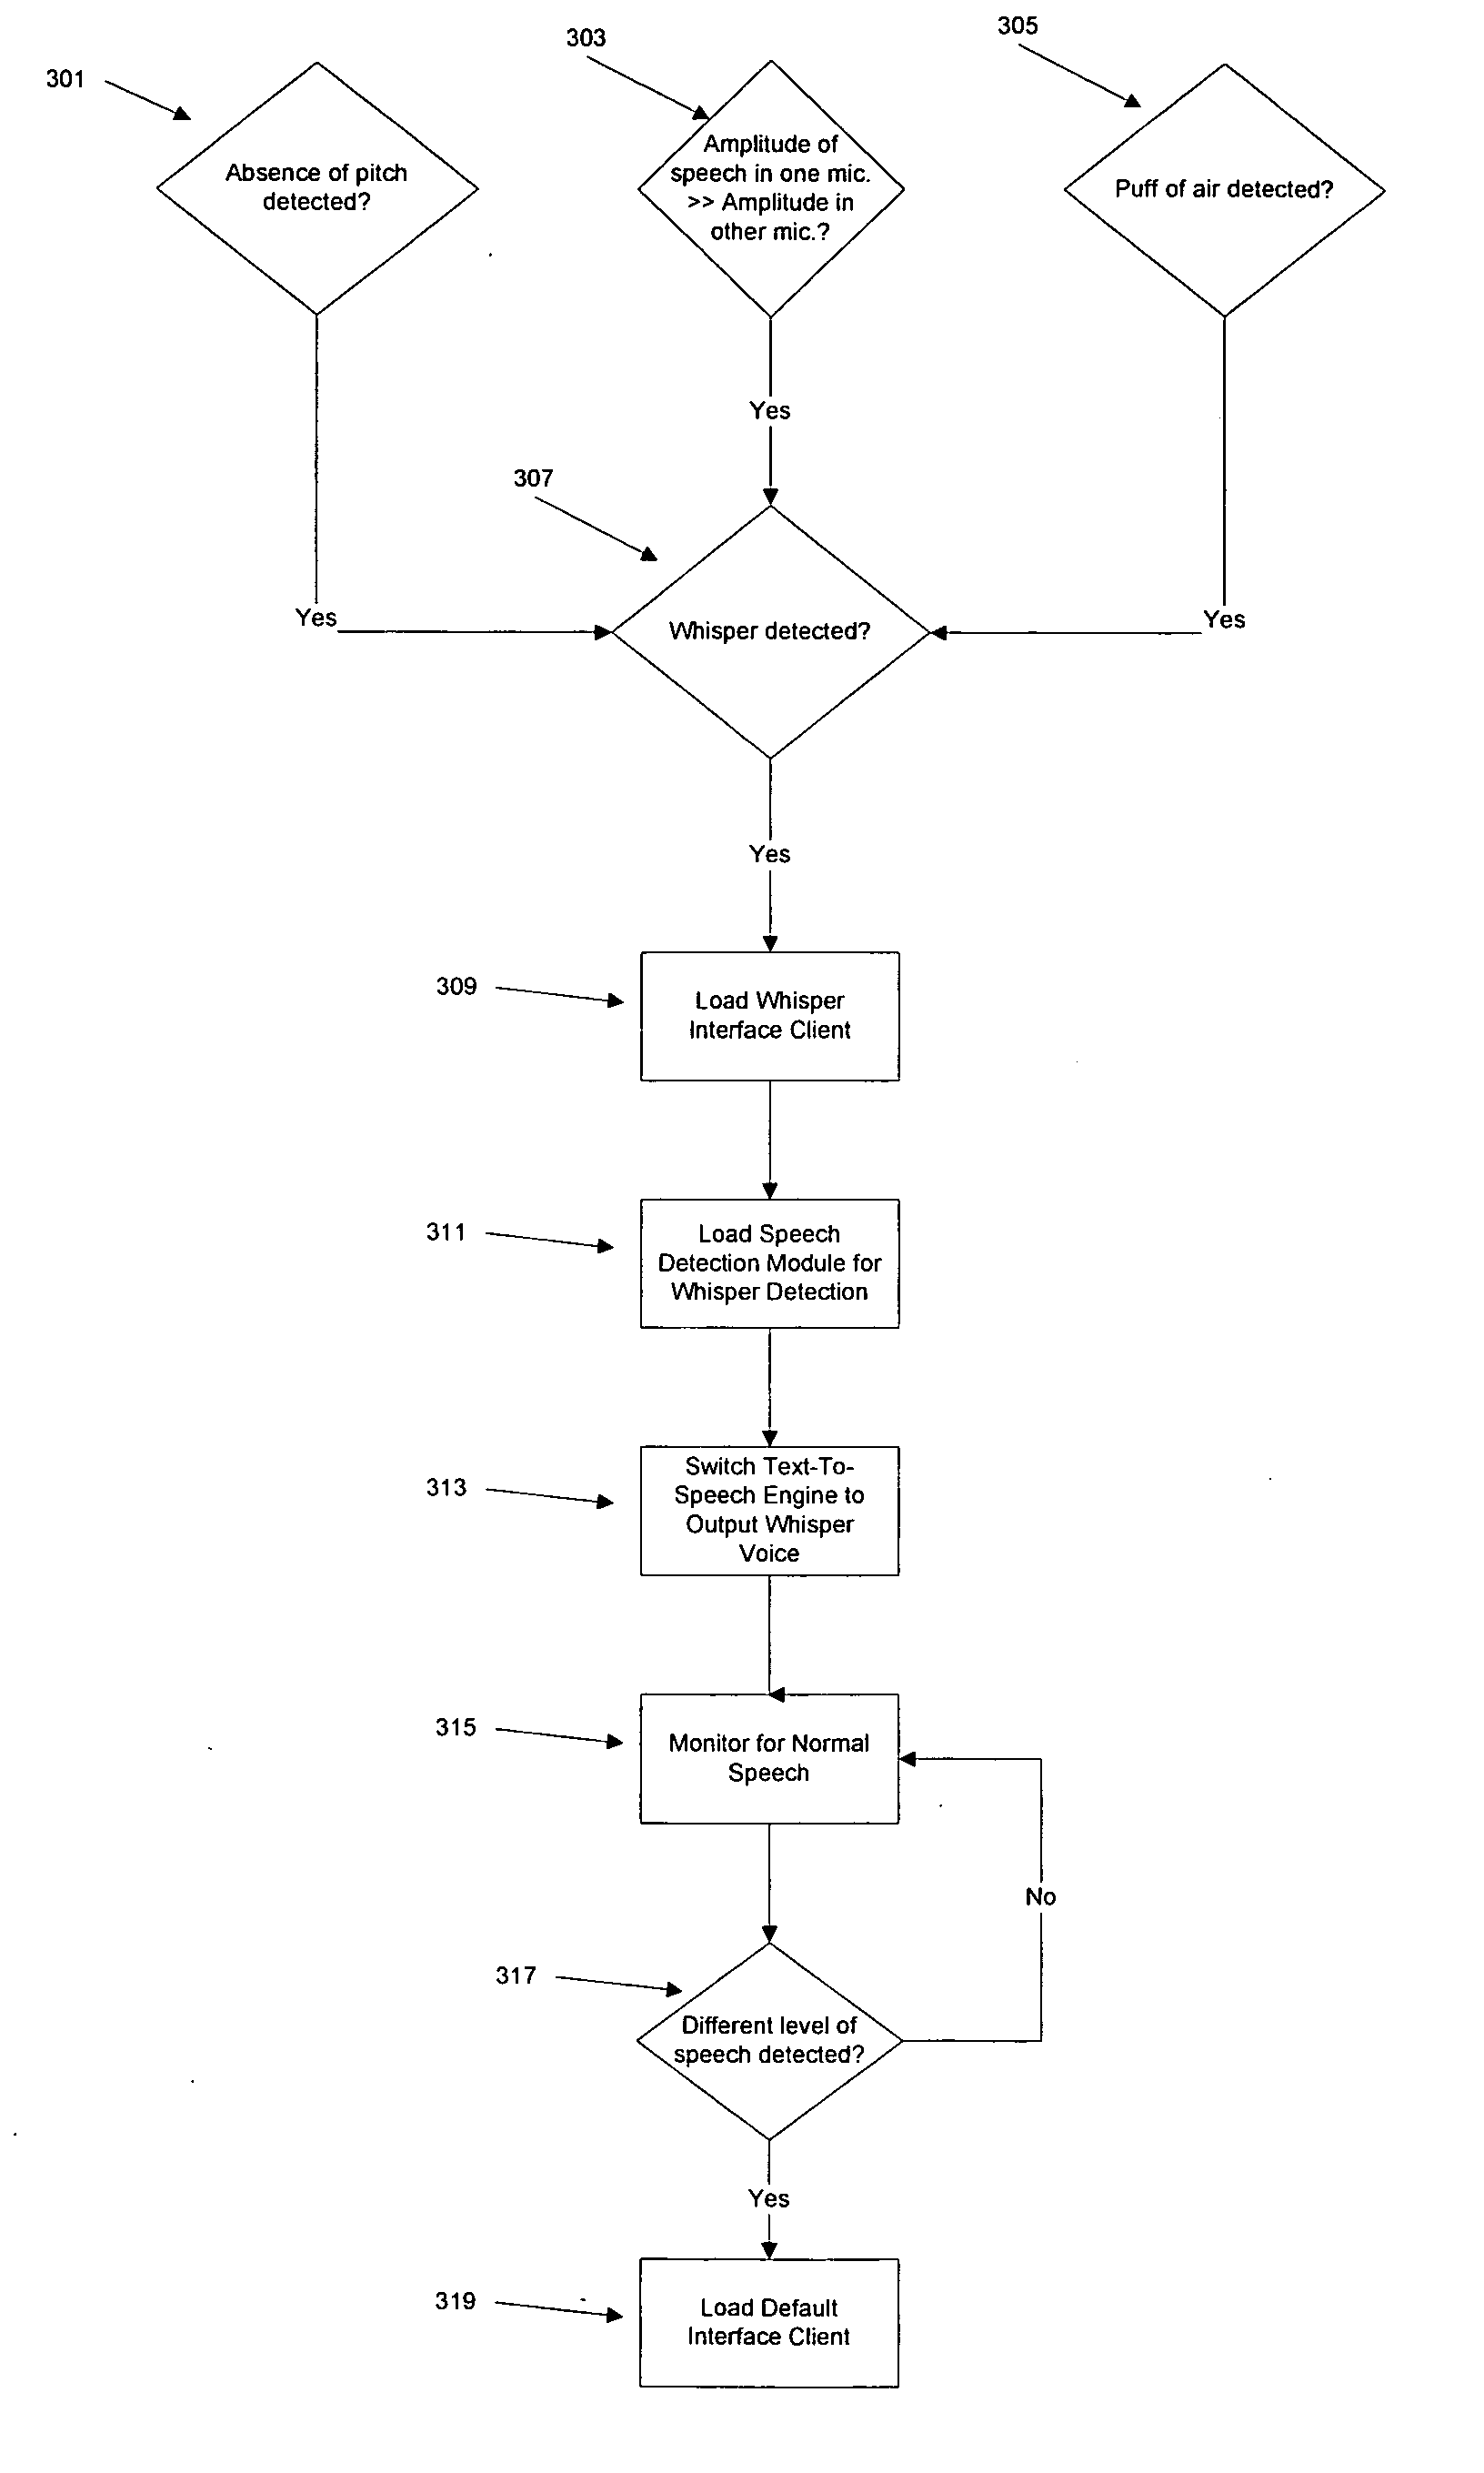 System and method for increasing recognition accuracy and modifying the behavior of a device in response to the detection of different levels of speech